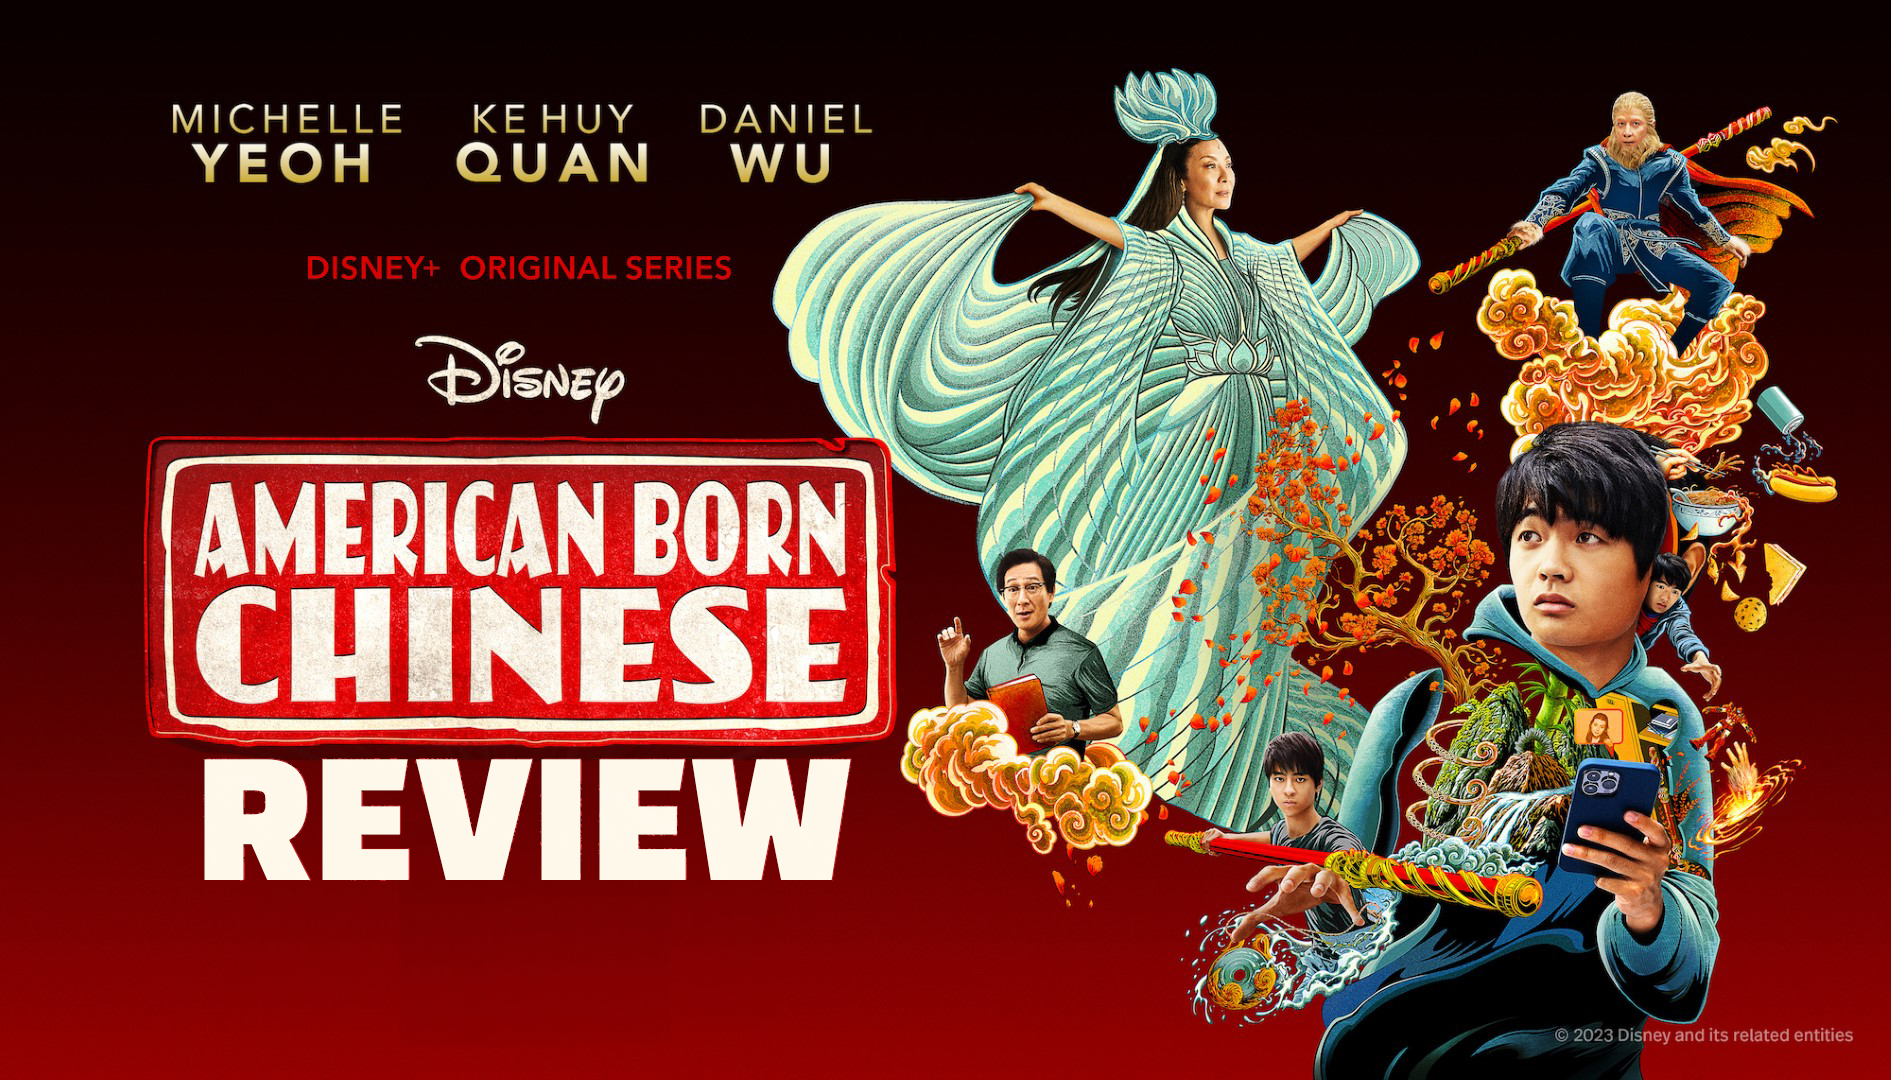 American Born Chinese Review